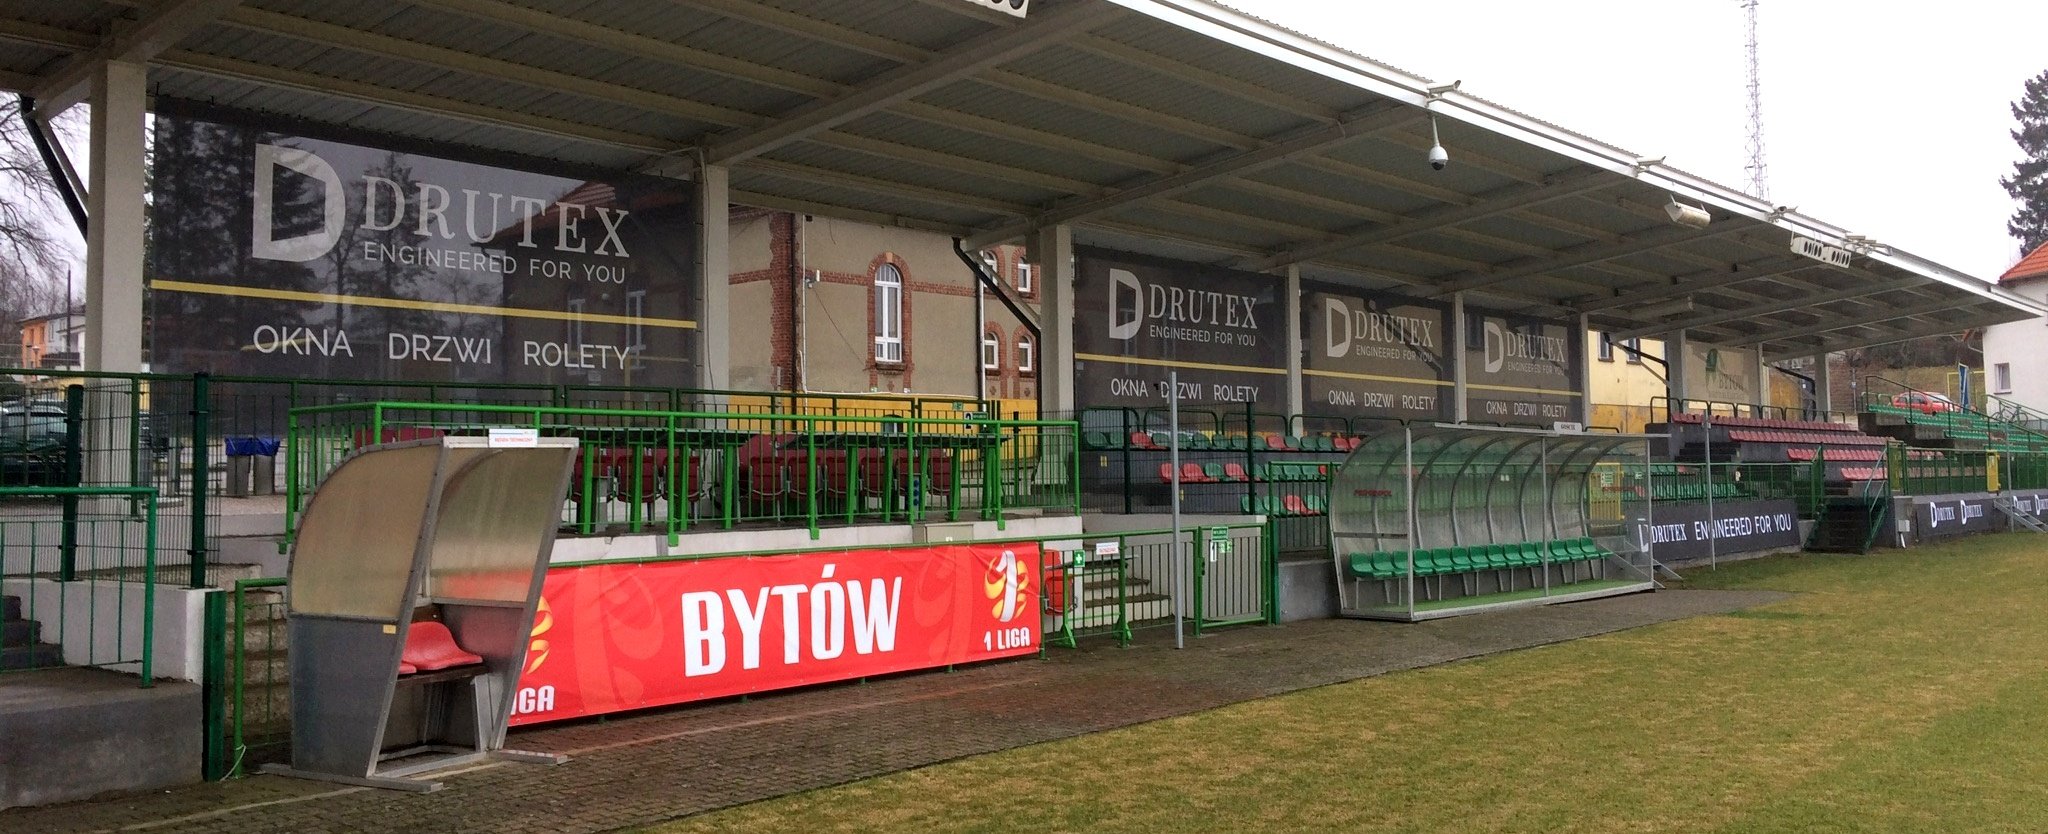 Drutex withdraws from sponsoring the first-division Drutex-Bytovia